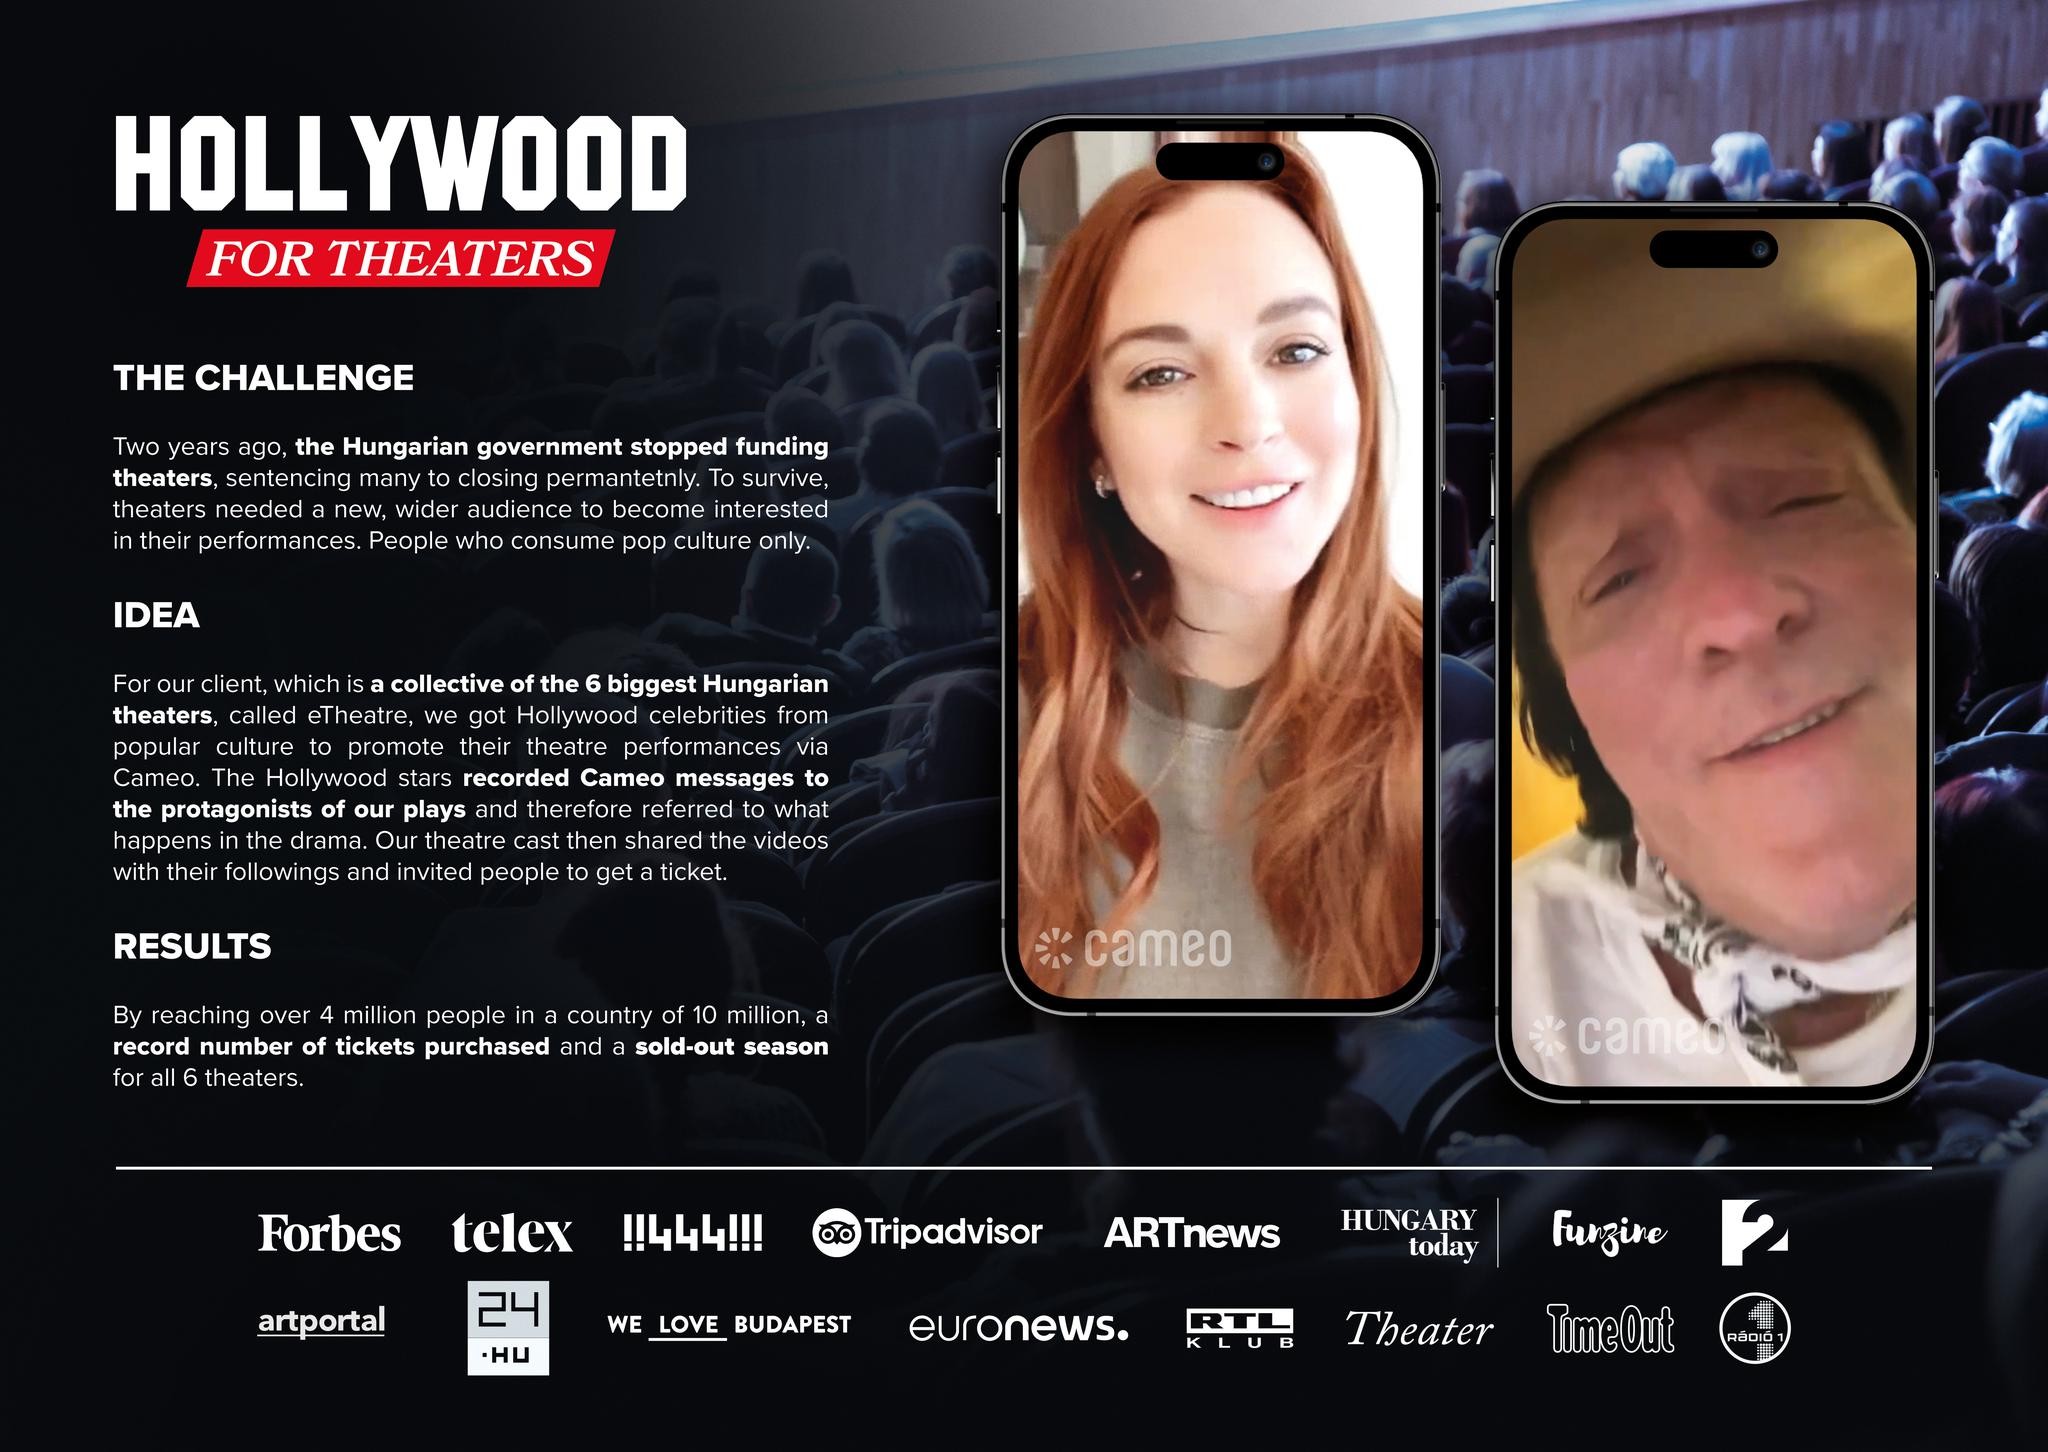 HOLLYWOOD FOR THEATERS